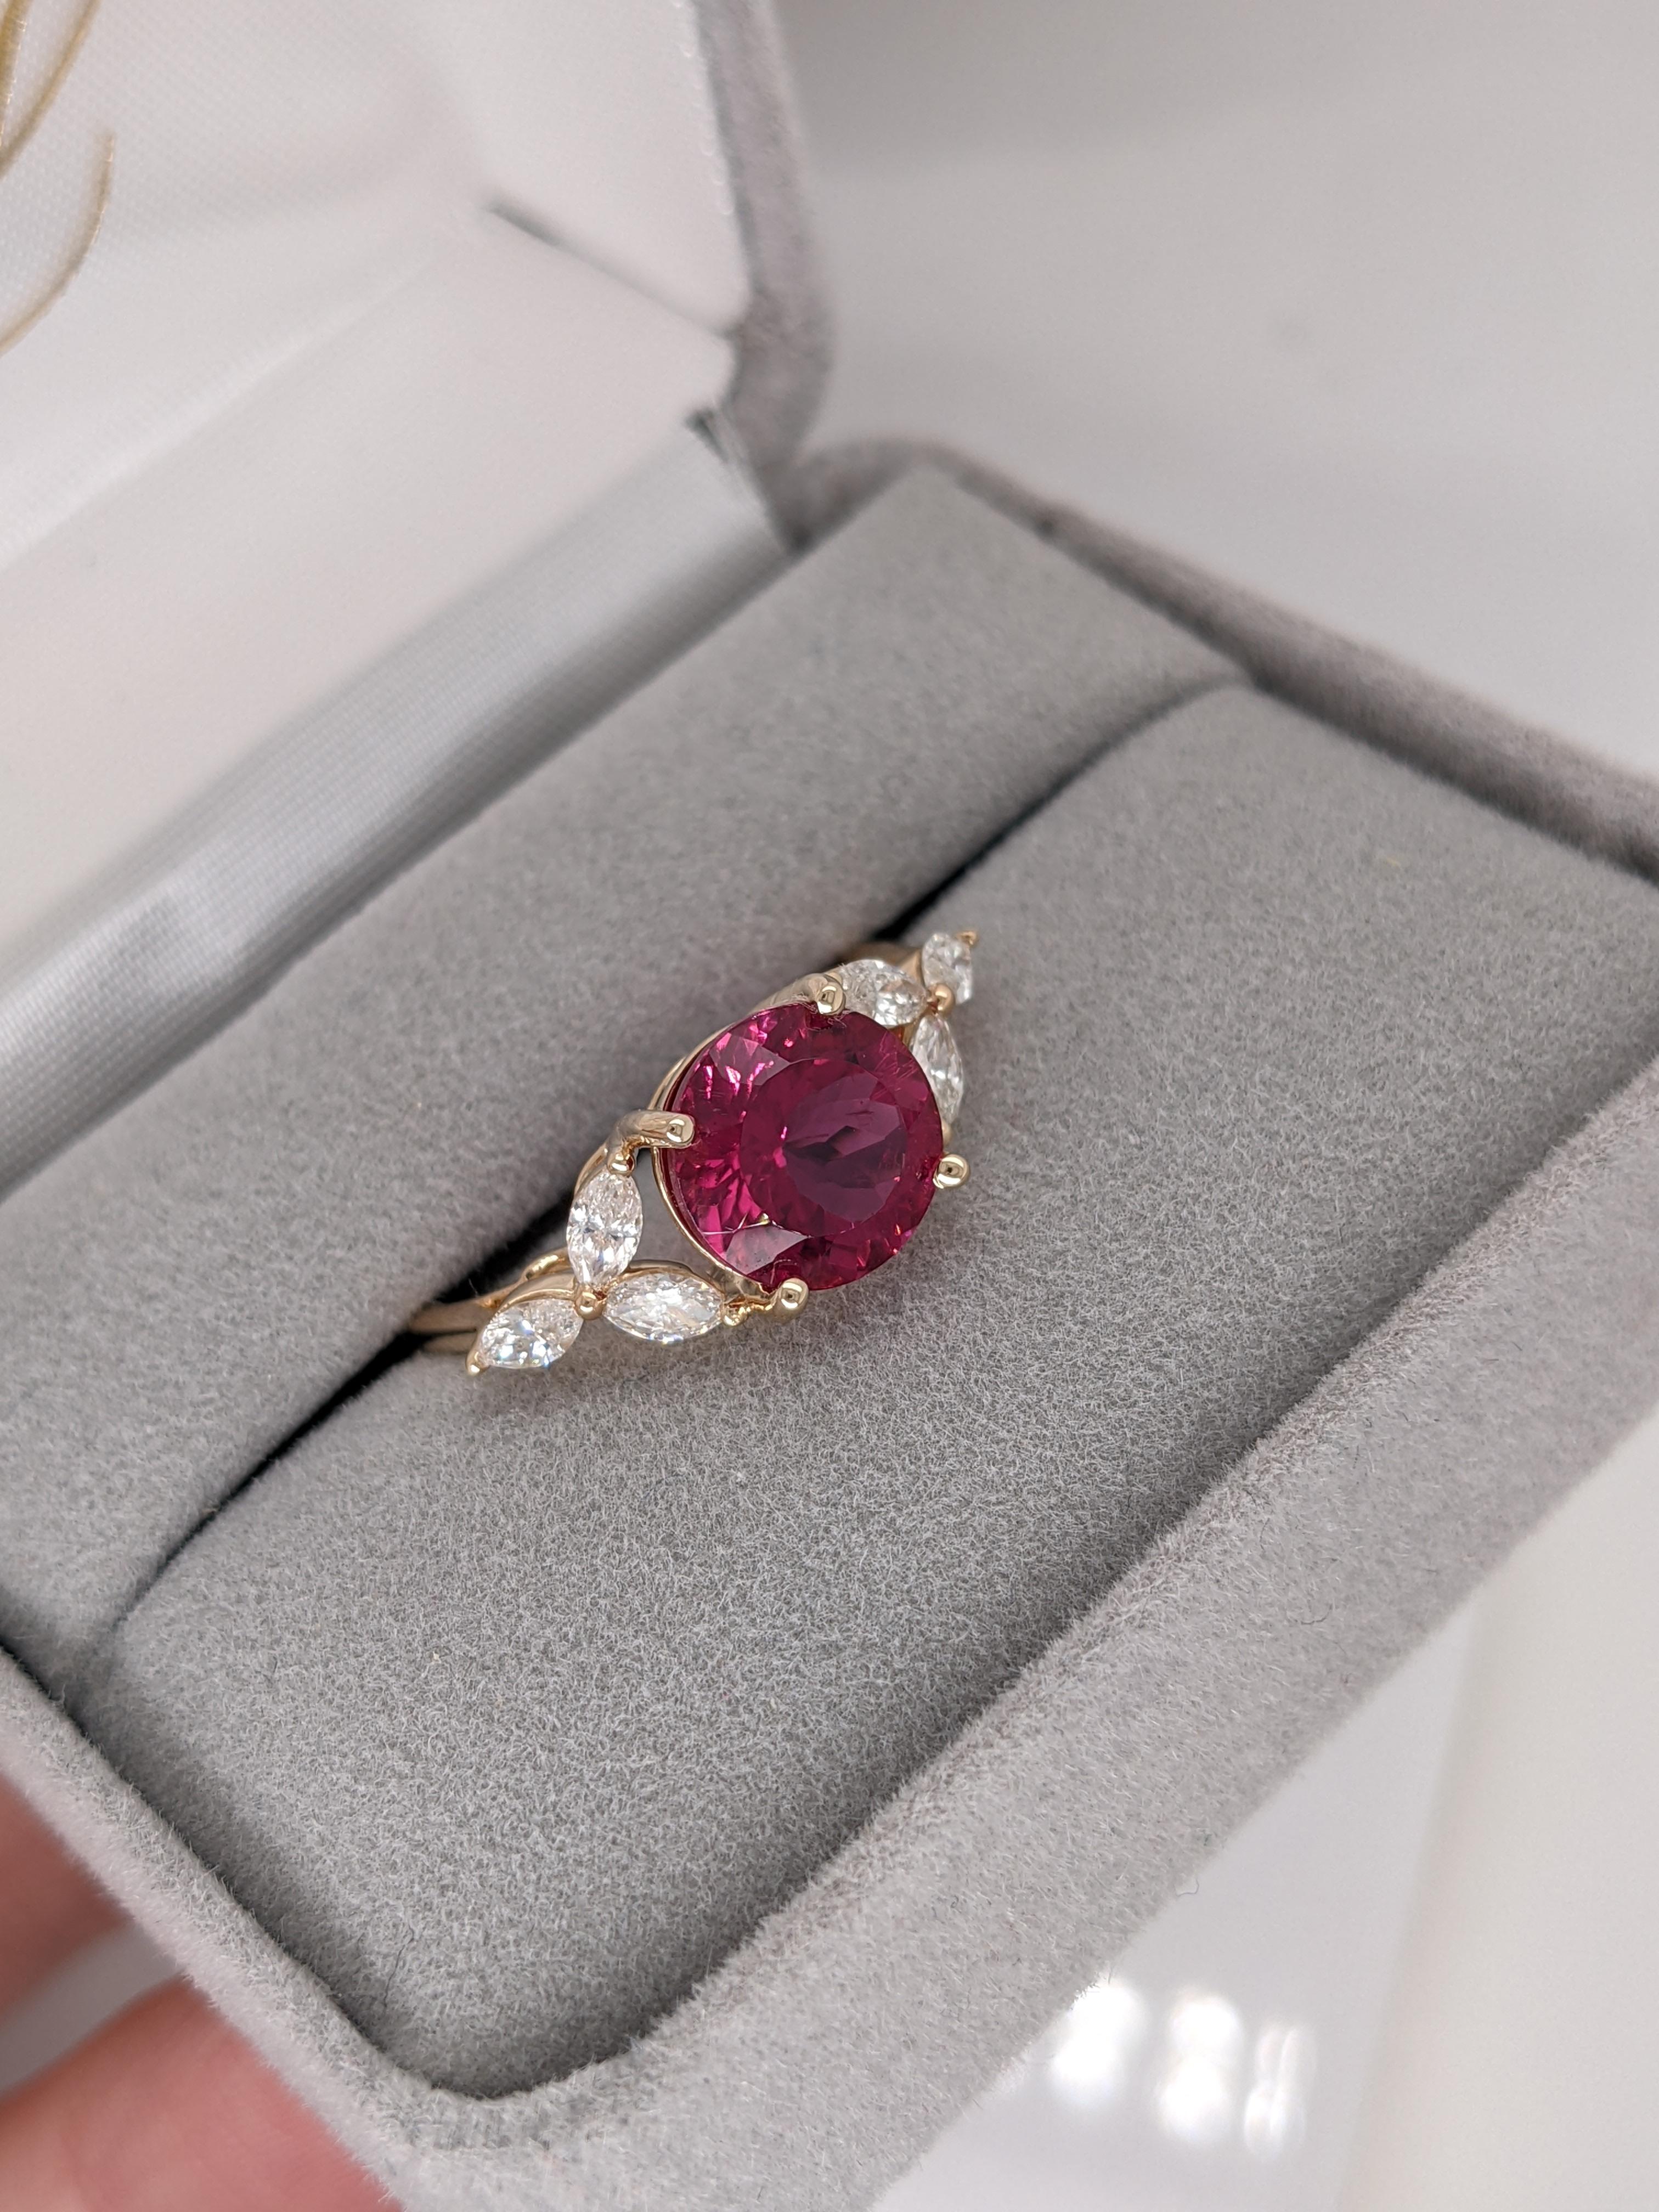 2.25 carat Rubellite Tourmaline in 14k Yellow Gold w Diamond Accents Round 8mm For Sale 1